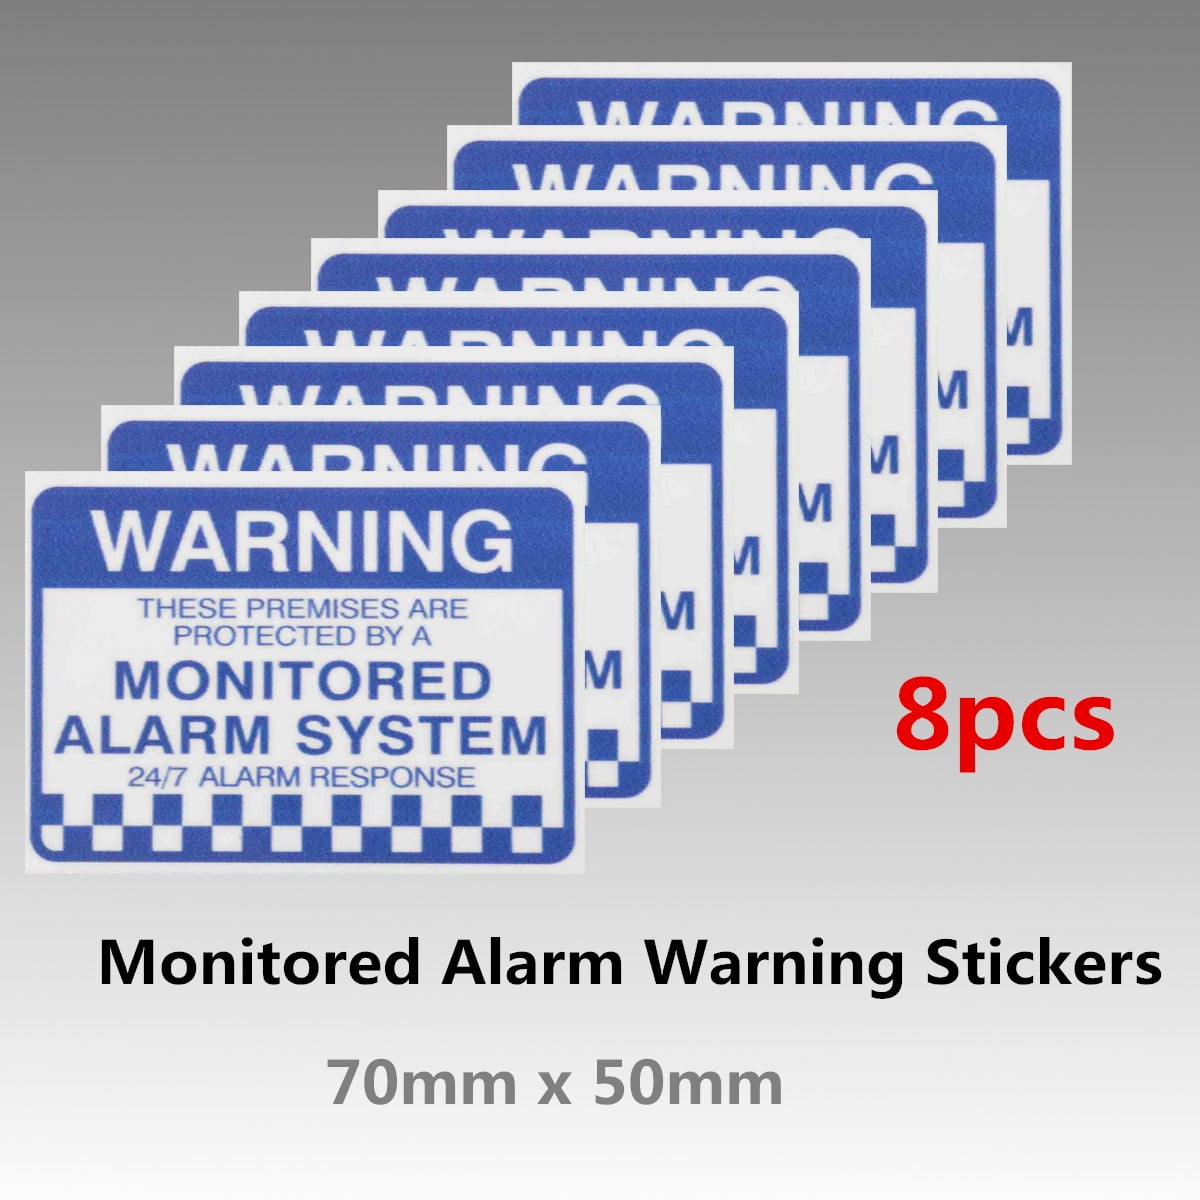 LOT OF 8 BRINKS HOME SECURITY SYSTEM ALARM WINDOW DECAL WARNING STICKER SIGNS